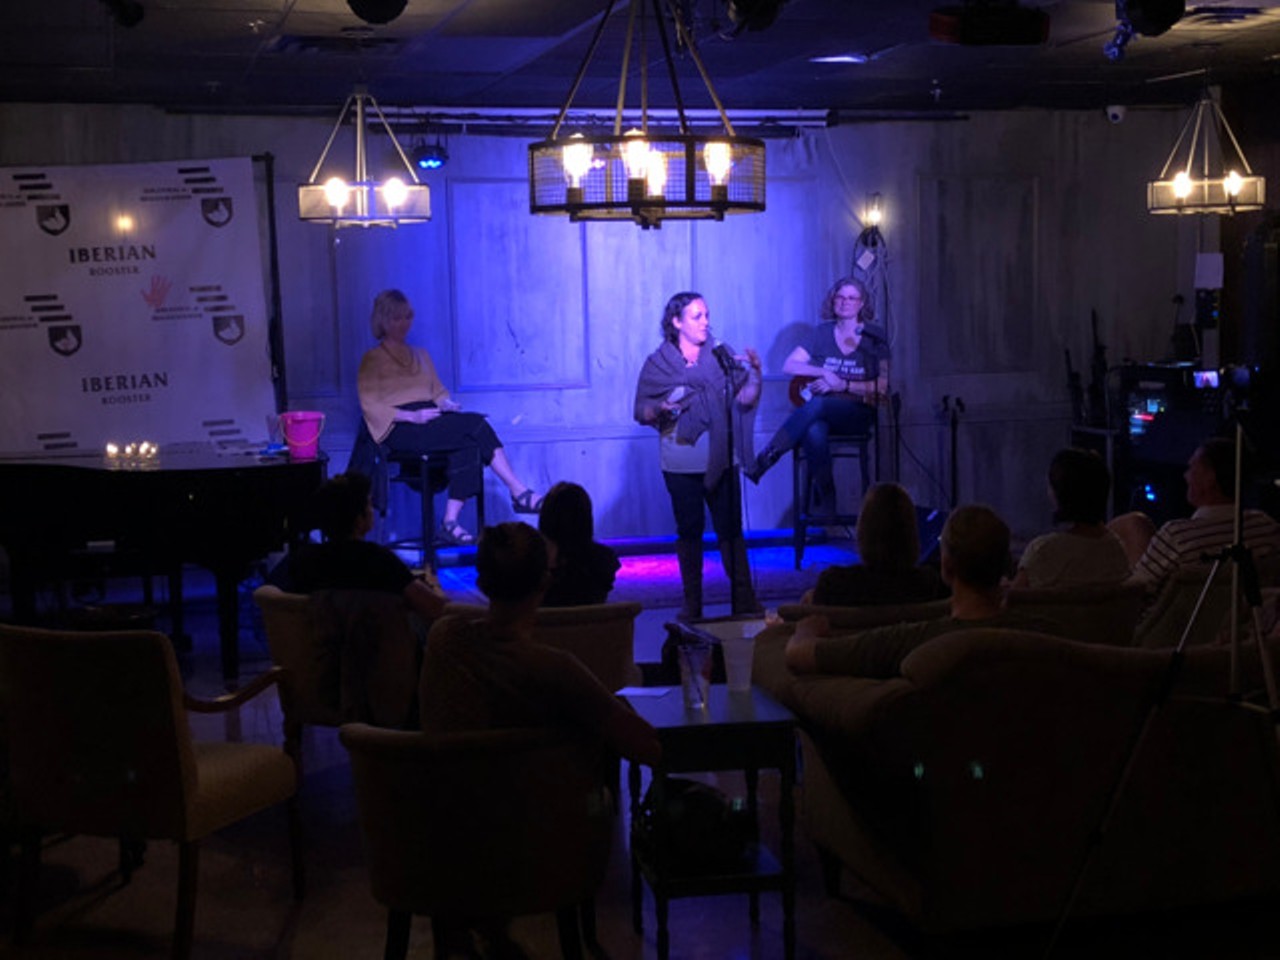 True Stories at the Iberian Rooster&#146;s Subcentral in St. Petersburg
$5. Second Wednesday of every month.
Photo via True Stories/Lisa Kirchner